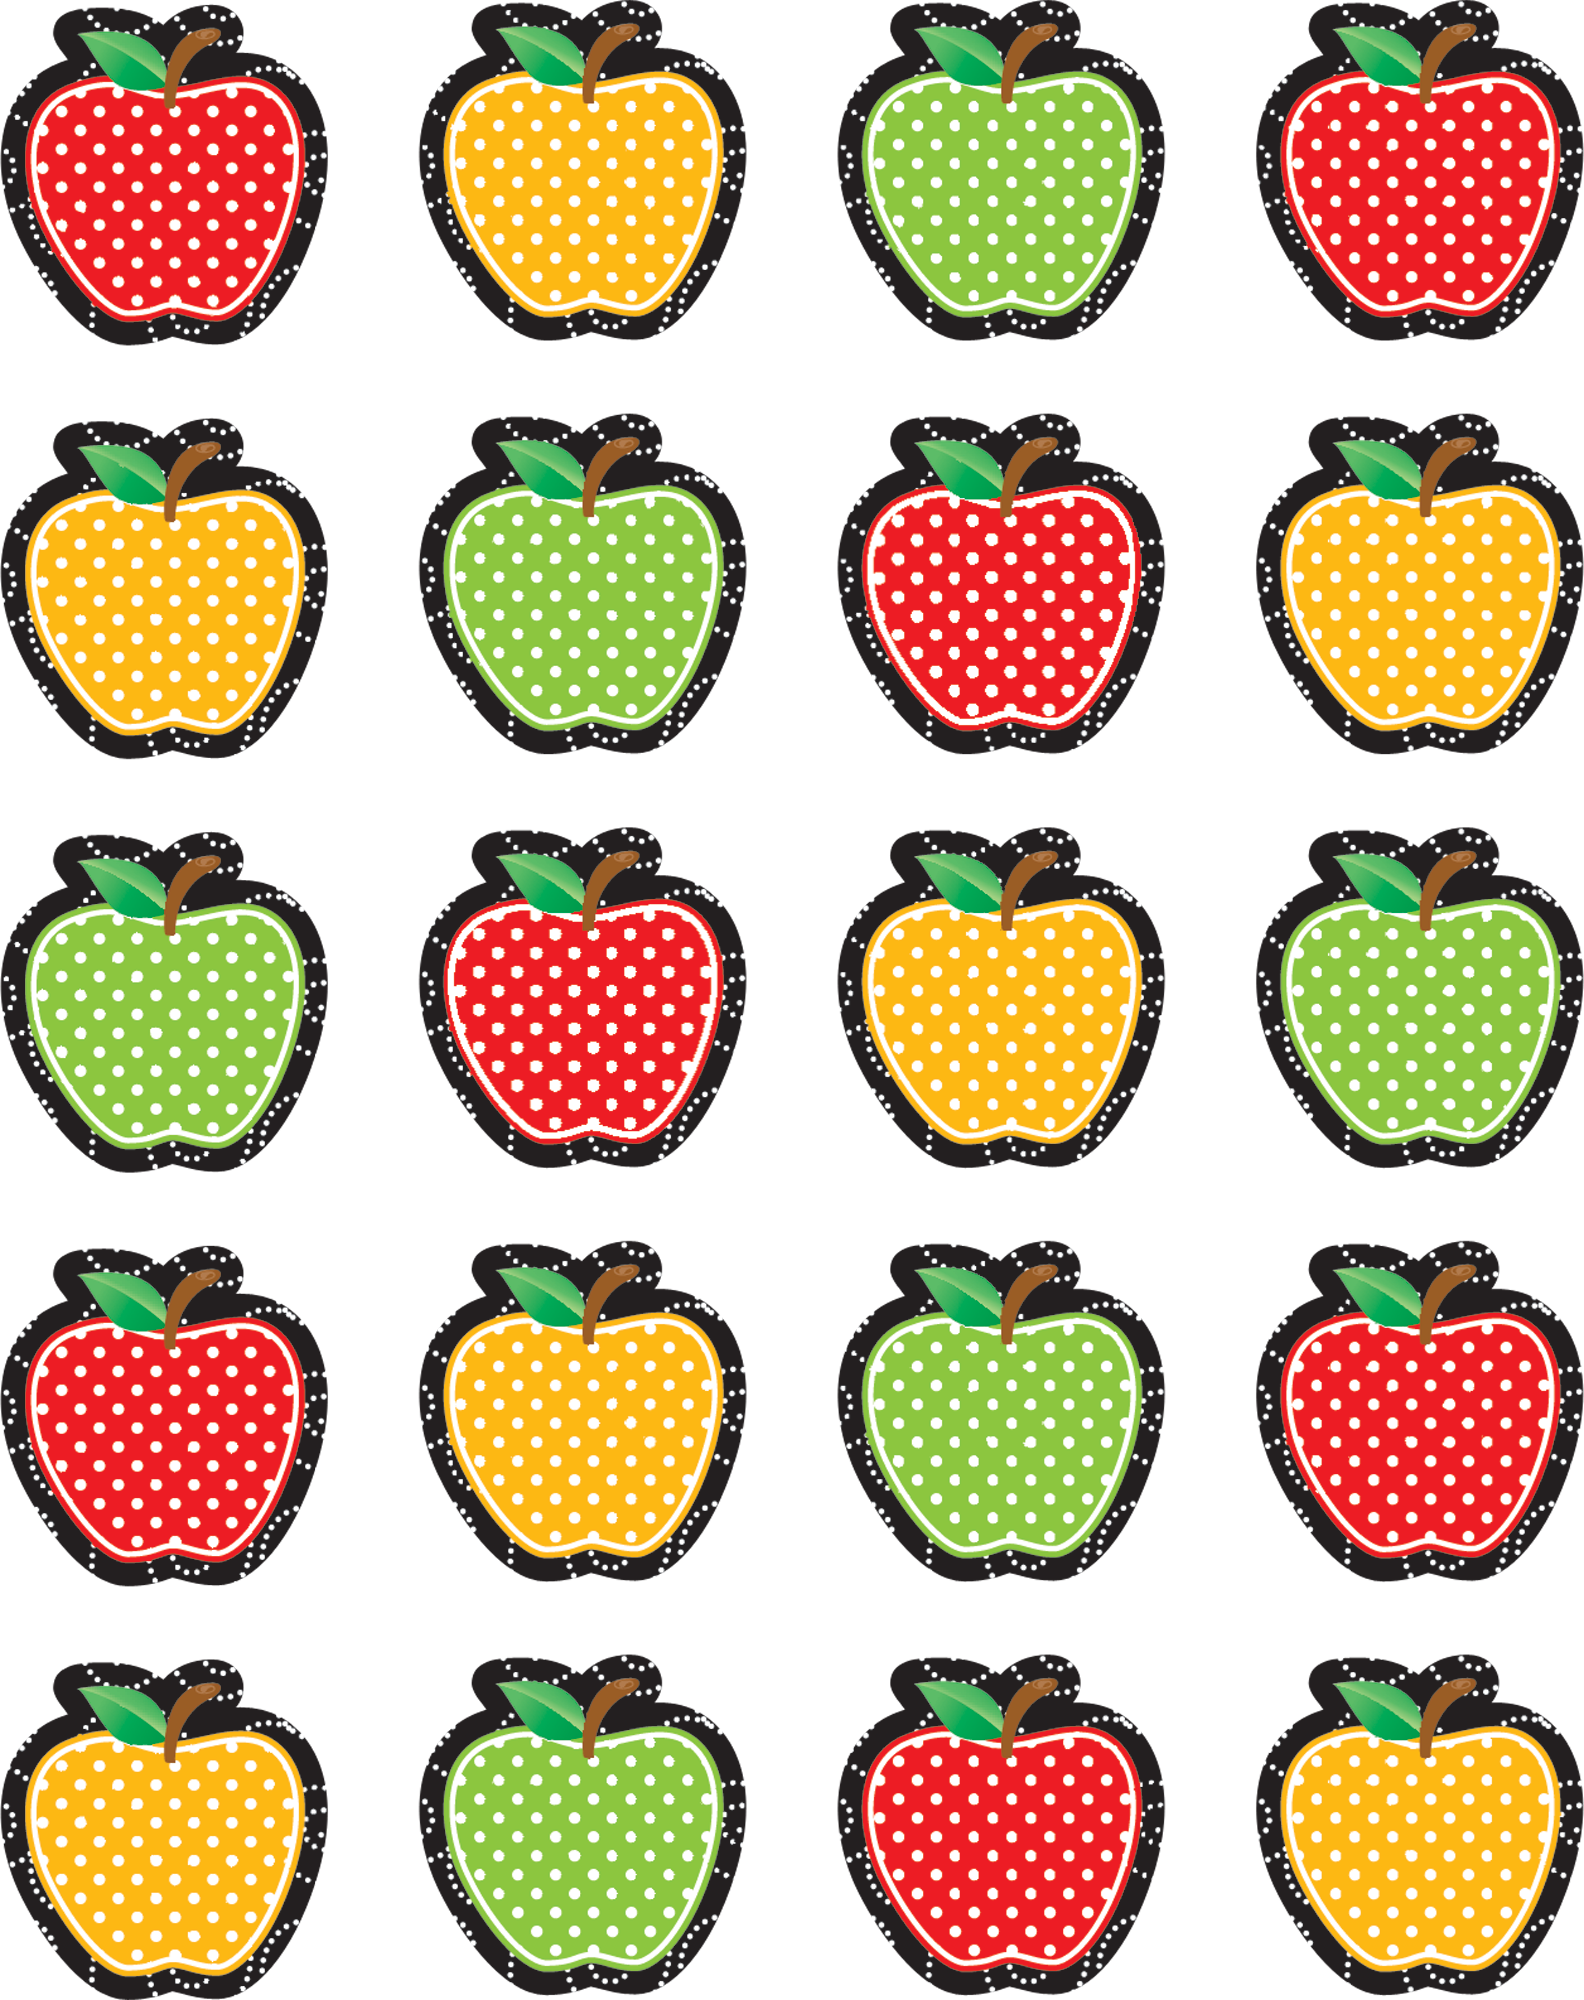 Dotty Apples Stickers